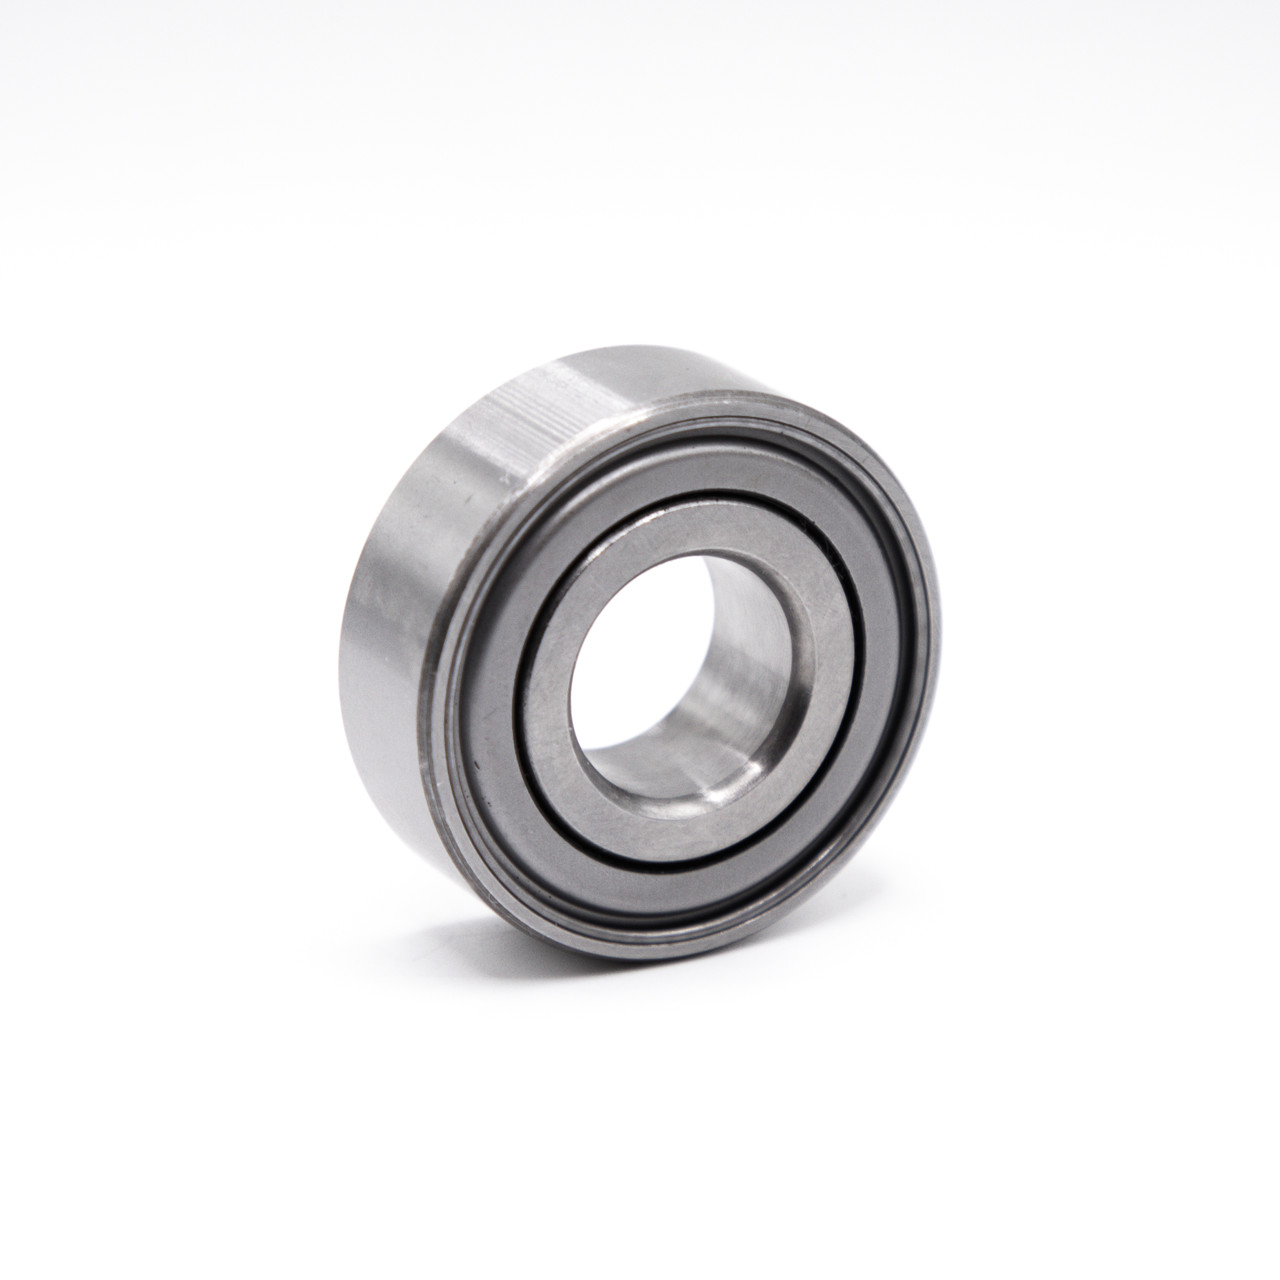 SS6200-ZZ Stainless Steel Ball Bearing 10x30x9 Side View